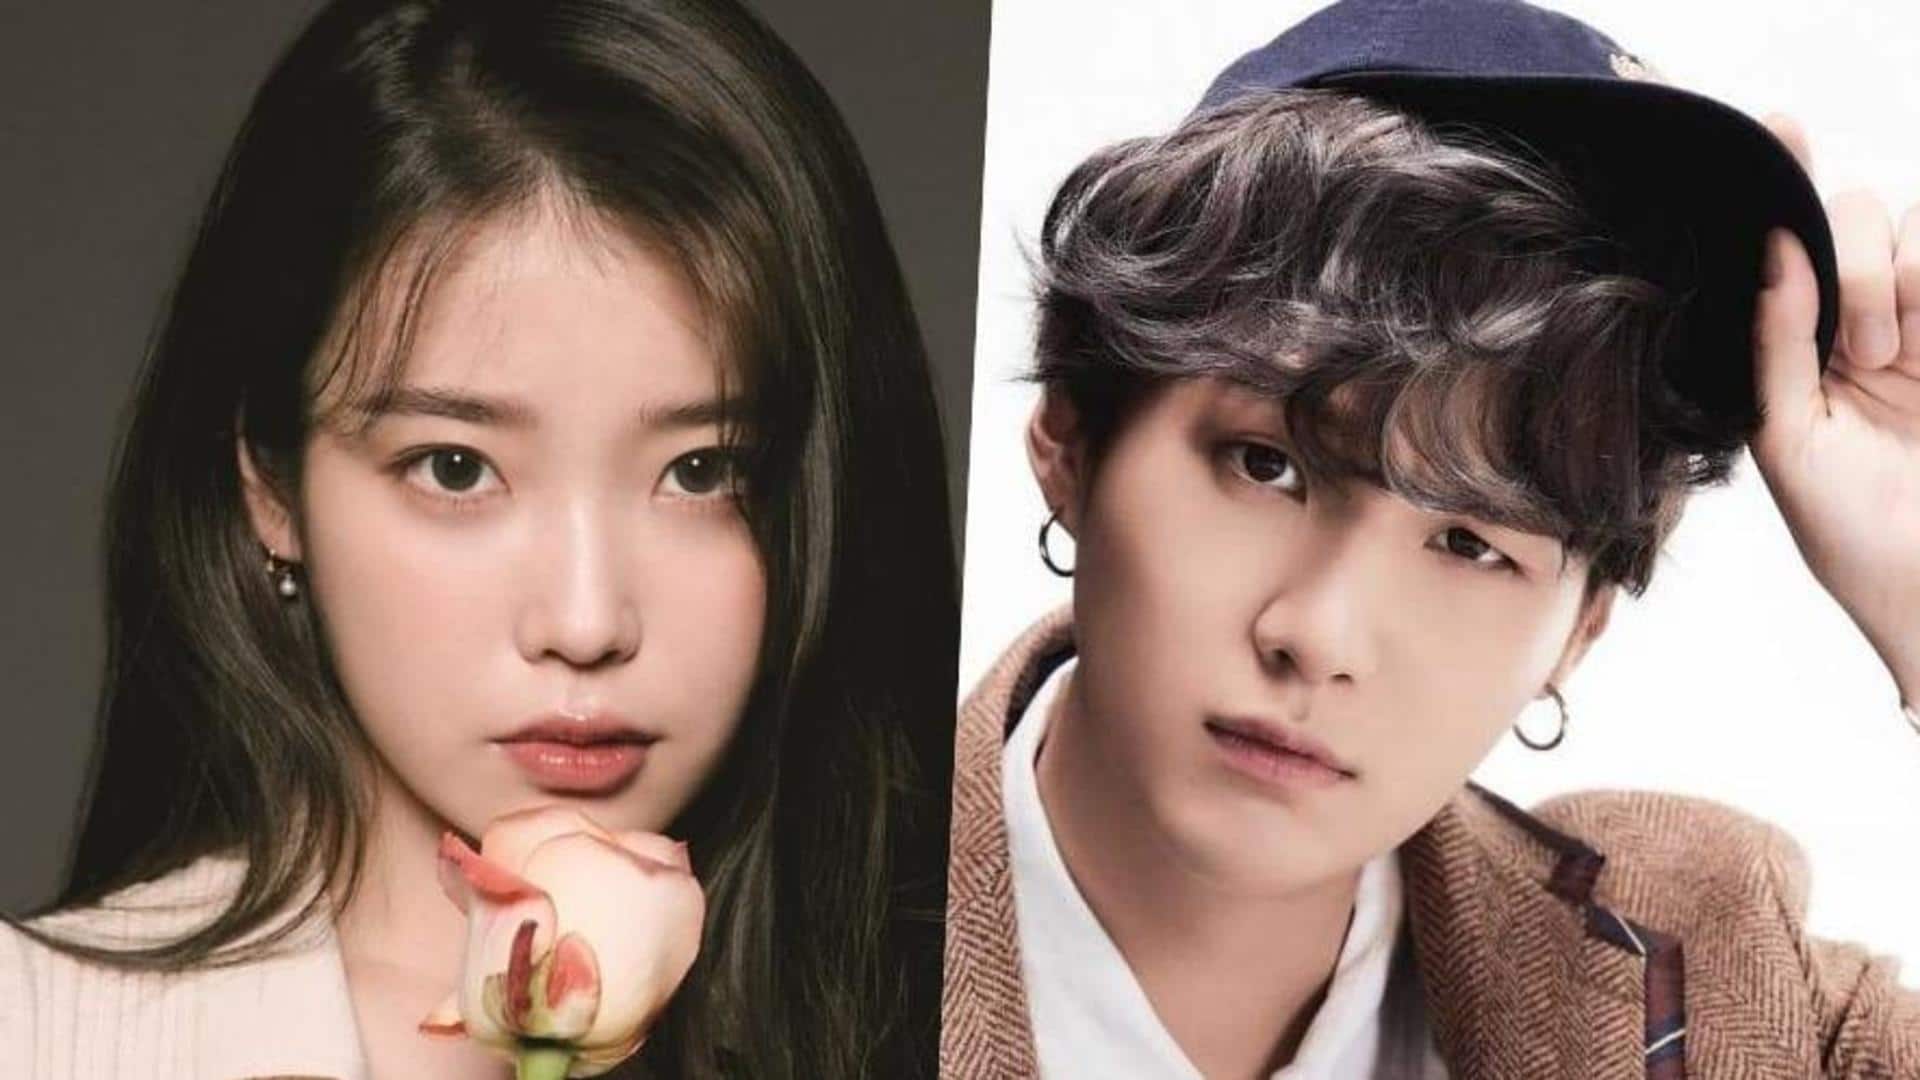 BTS's Suga might collaborate with IU: Reports